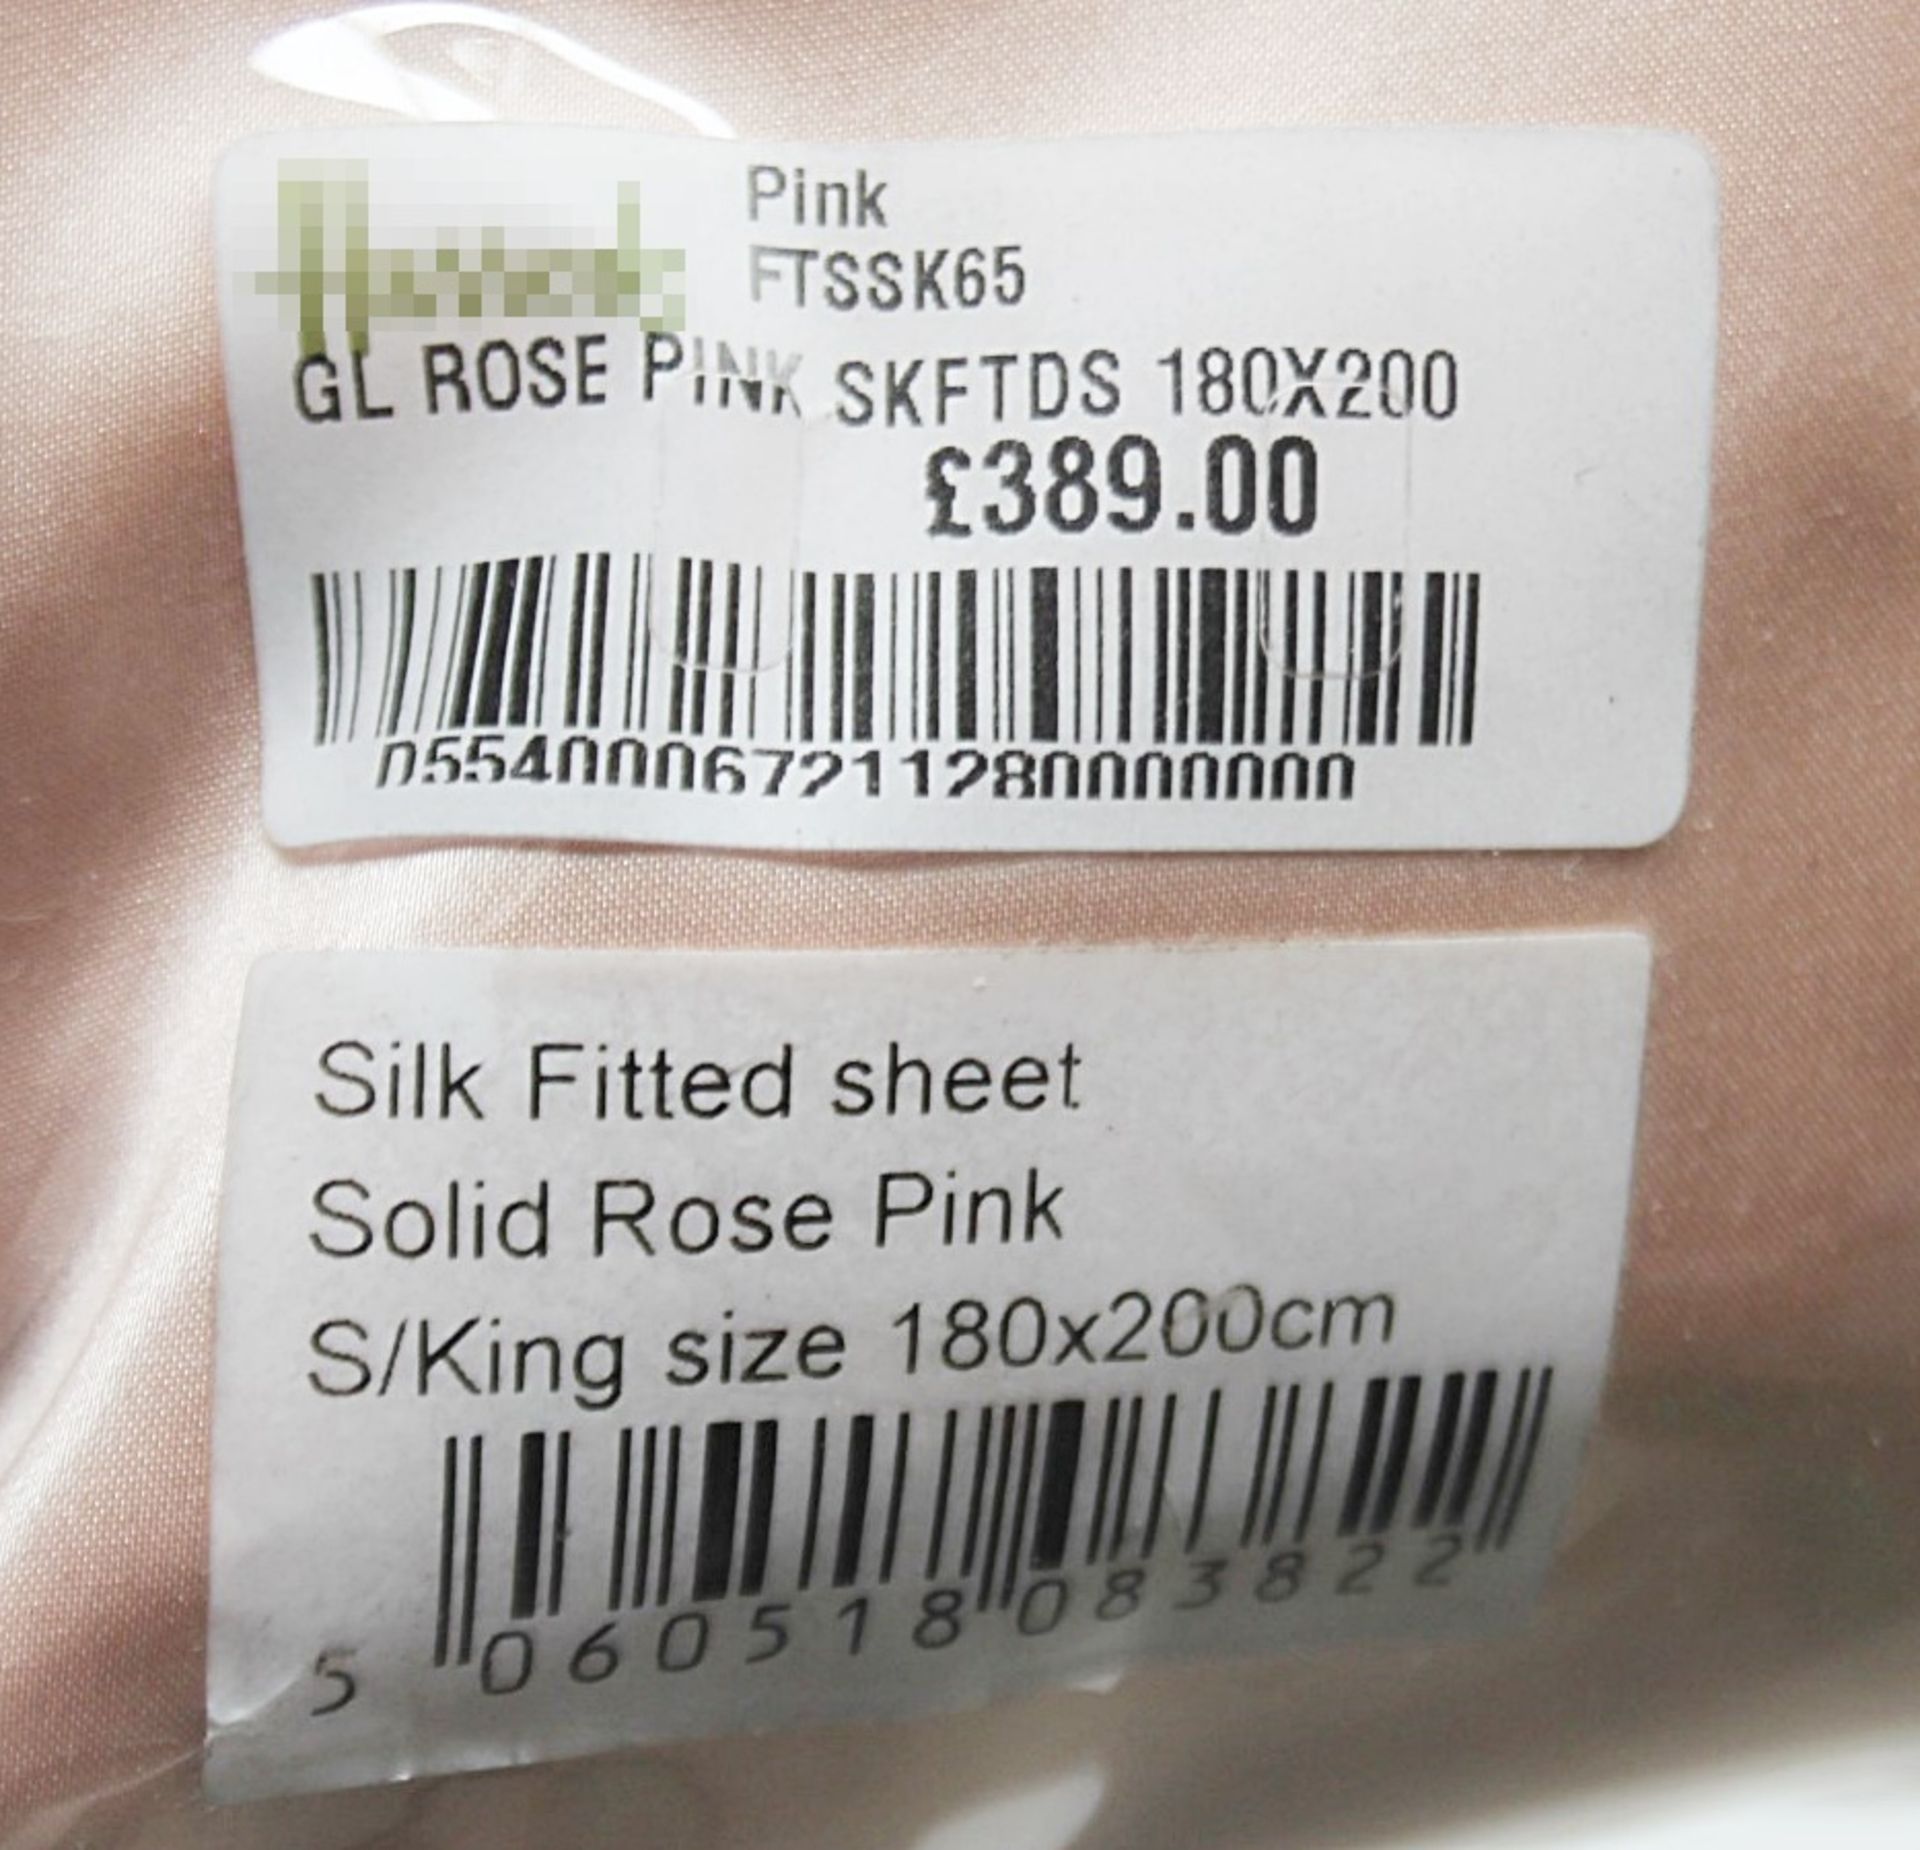 1 x GINGERLILY Luxury Silk Super King Fitted Sheet In Rose Pink - 180x200 - Original Price £389.00 - Image 2 of 5